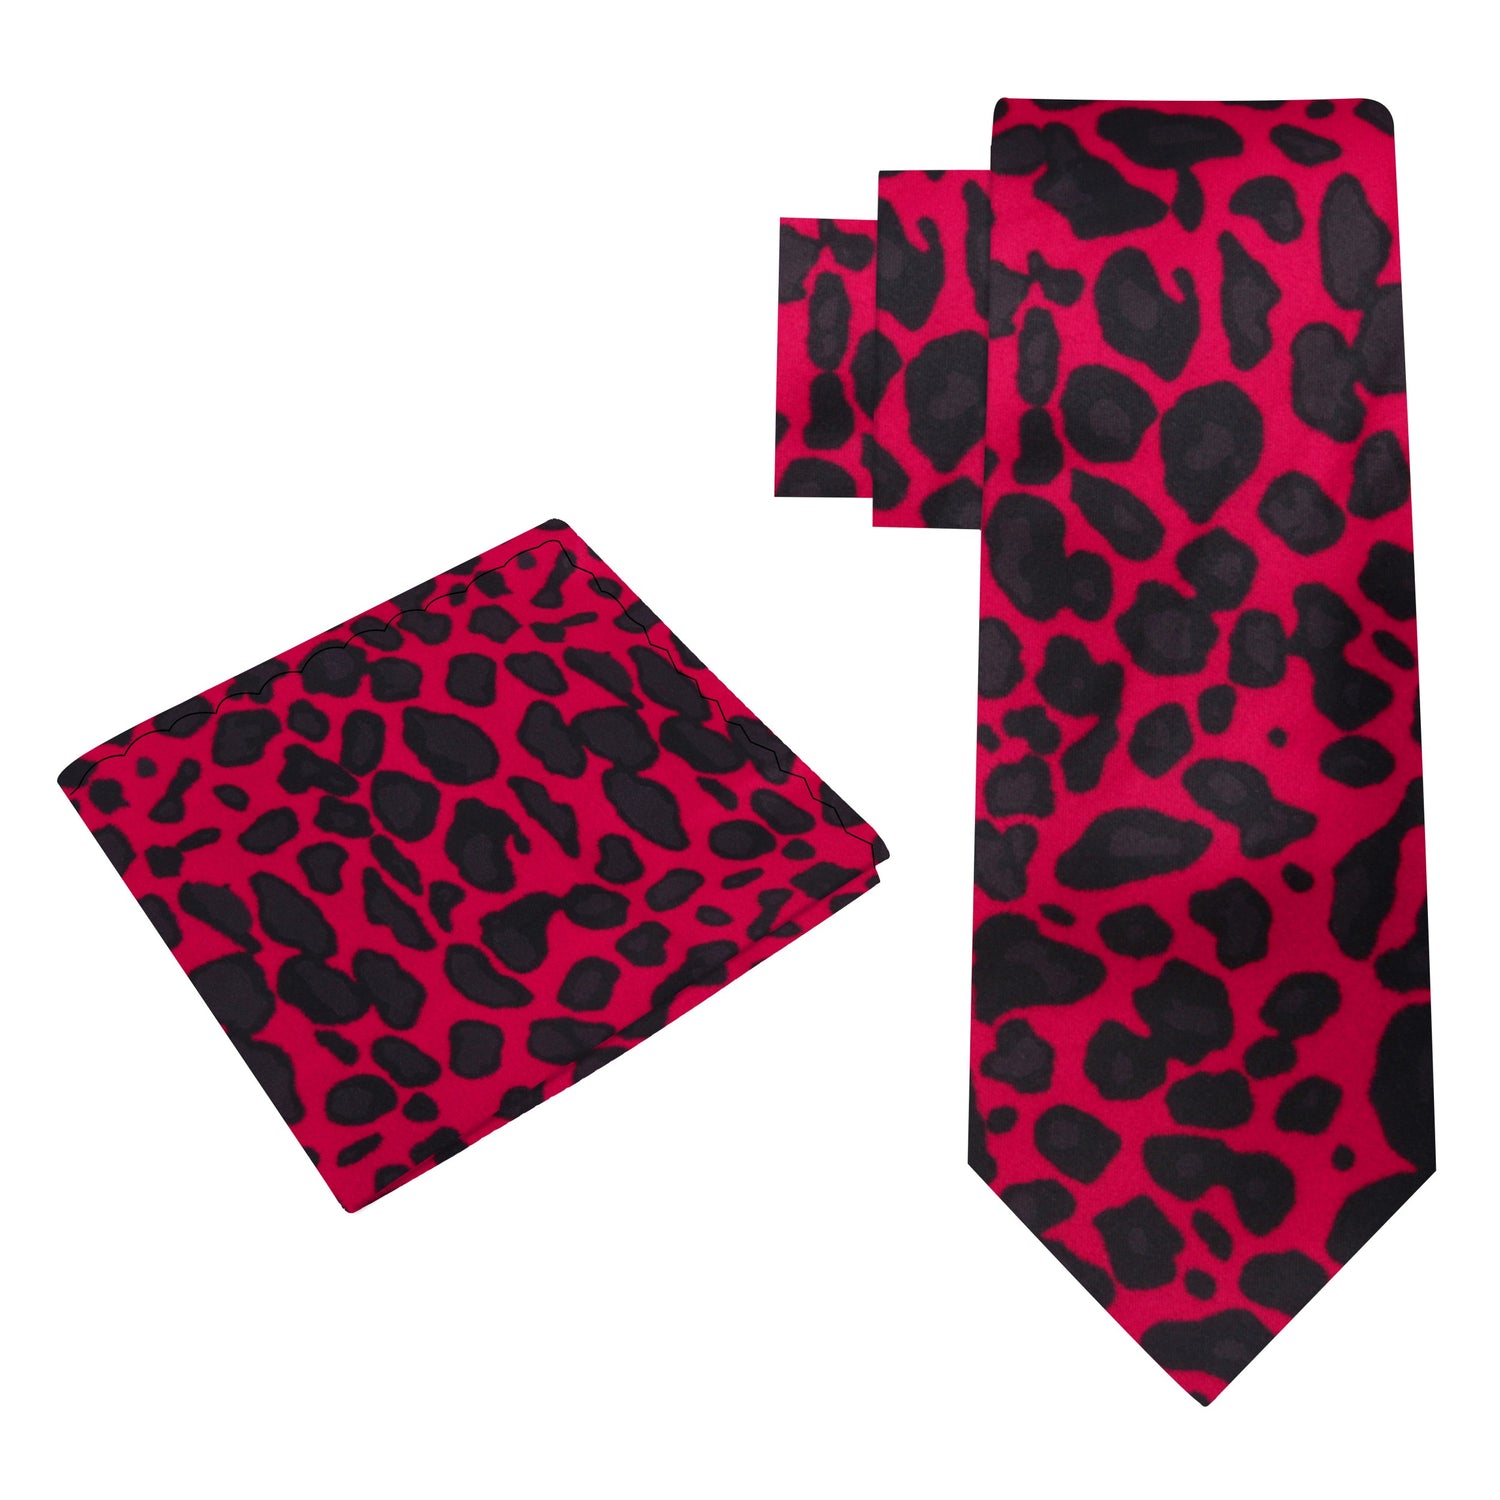 Alt View: Red Black Cheetah Tie and Square